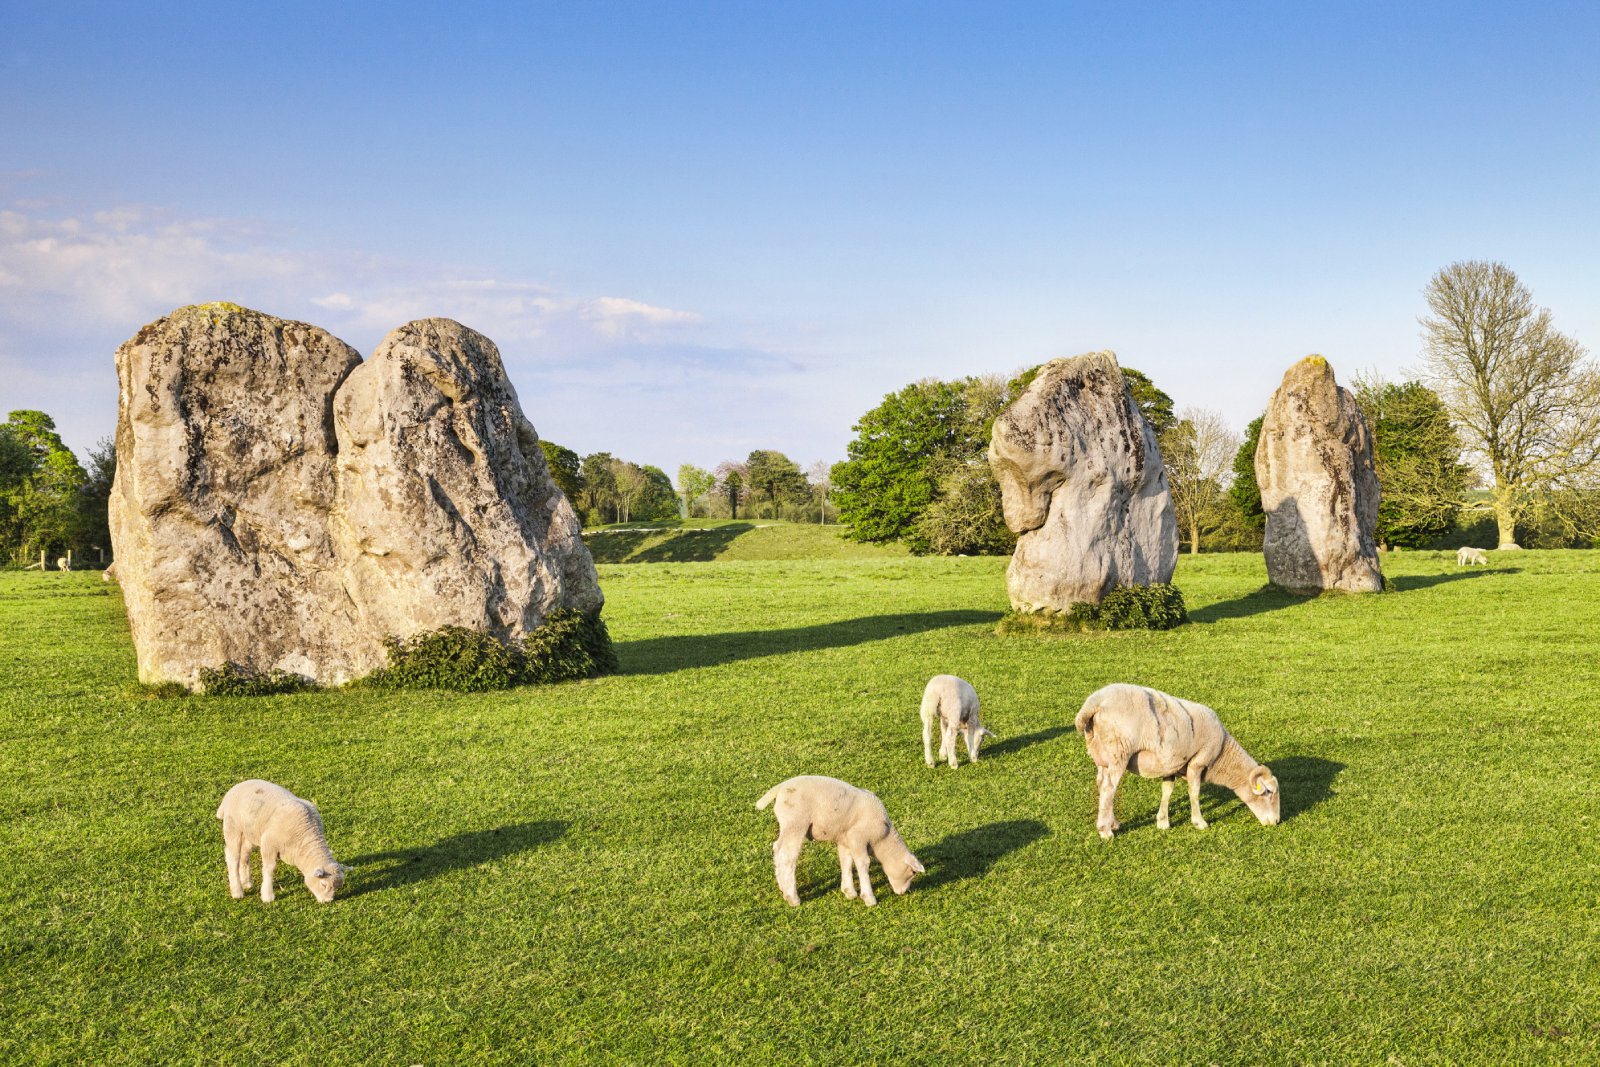 Image Credit: Shutterstock / travellight <p>Avebury’s stone circle rivals Stonehenge in mystique but not in crowds. You can actually touch the stones here, though the local sheep might outnumber the visitors.</p>